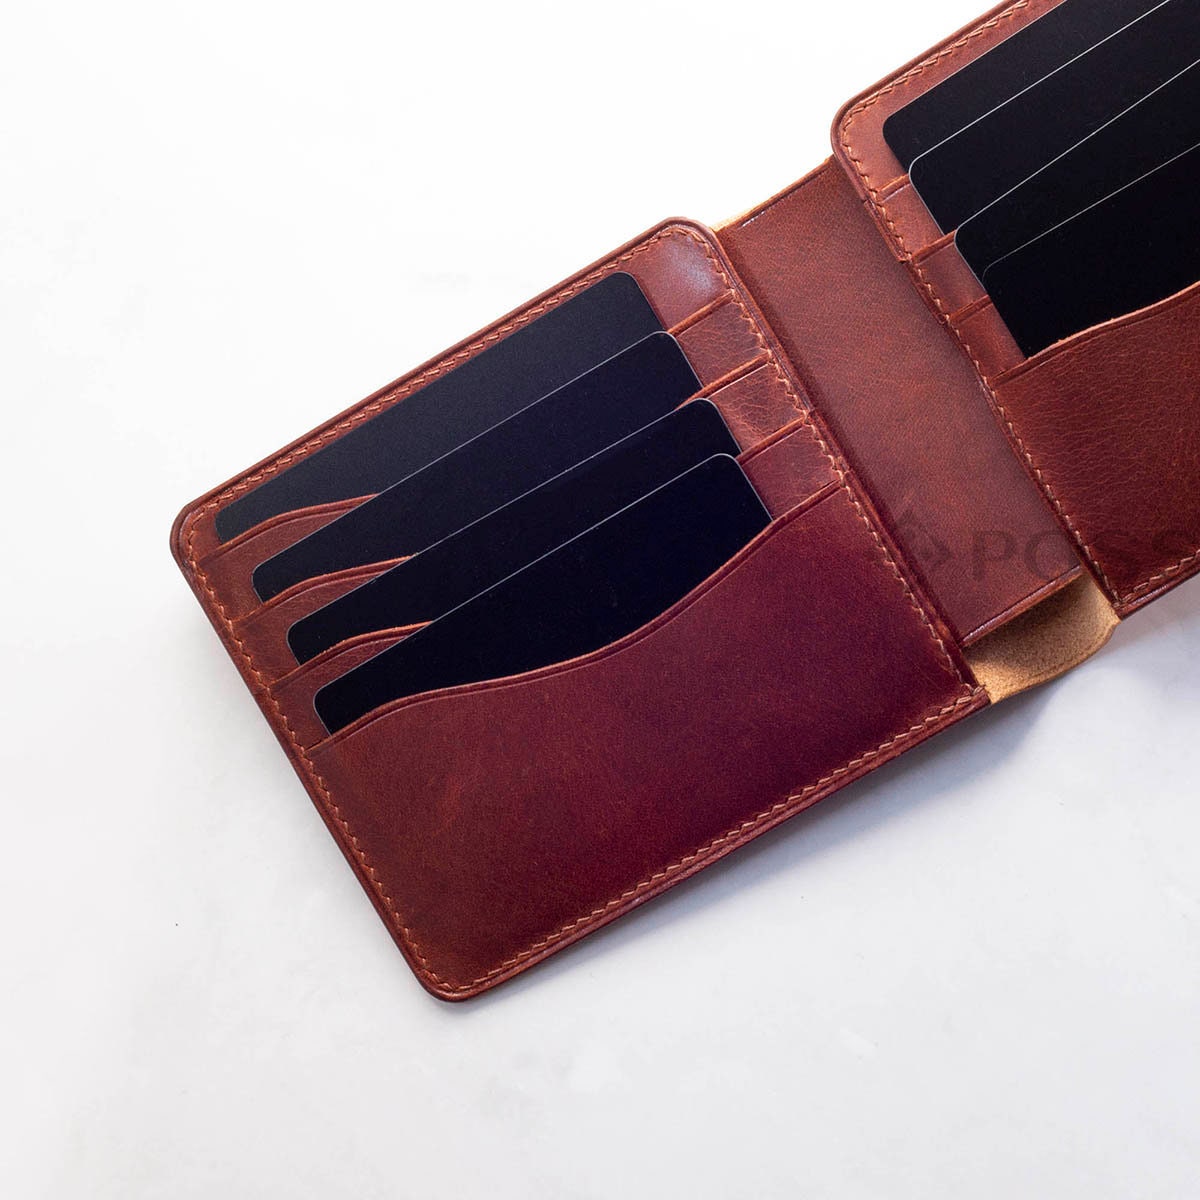 Handmade Brown Leather 8 Card Slot Bifold, Handcrafted EDC Bifold Wallet Italian Vegetable Tanned Dollaro, Wax Pull up, Made in Spain